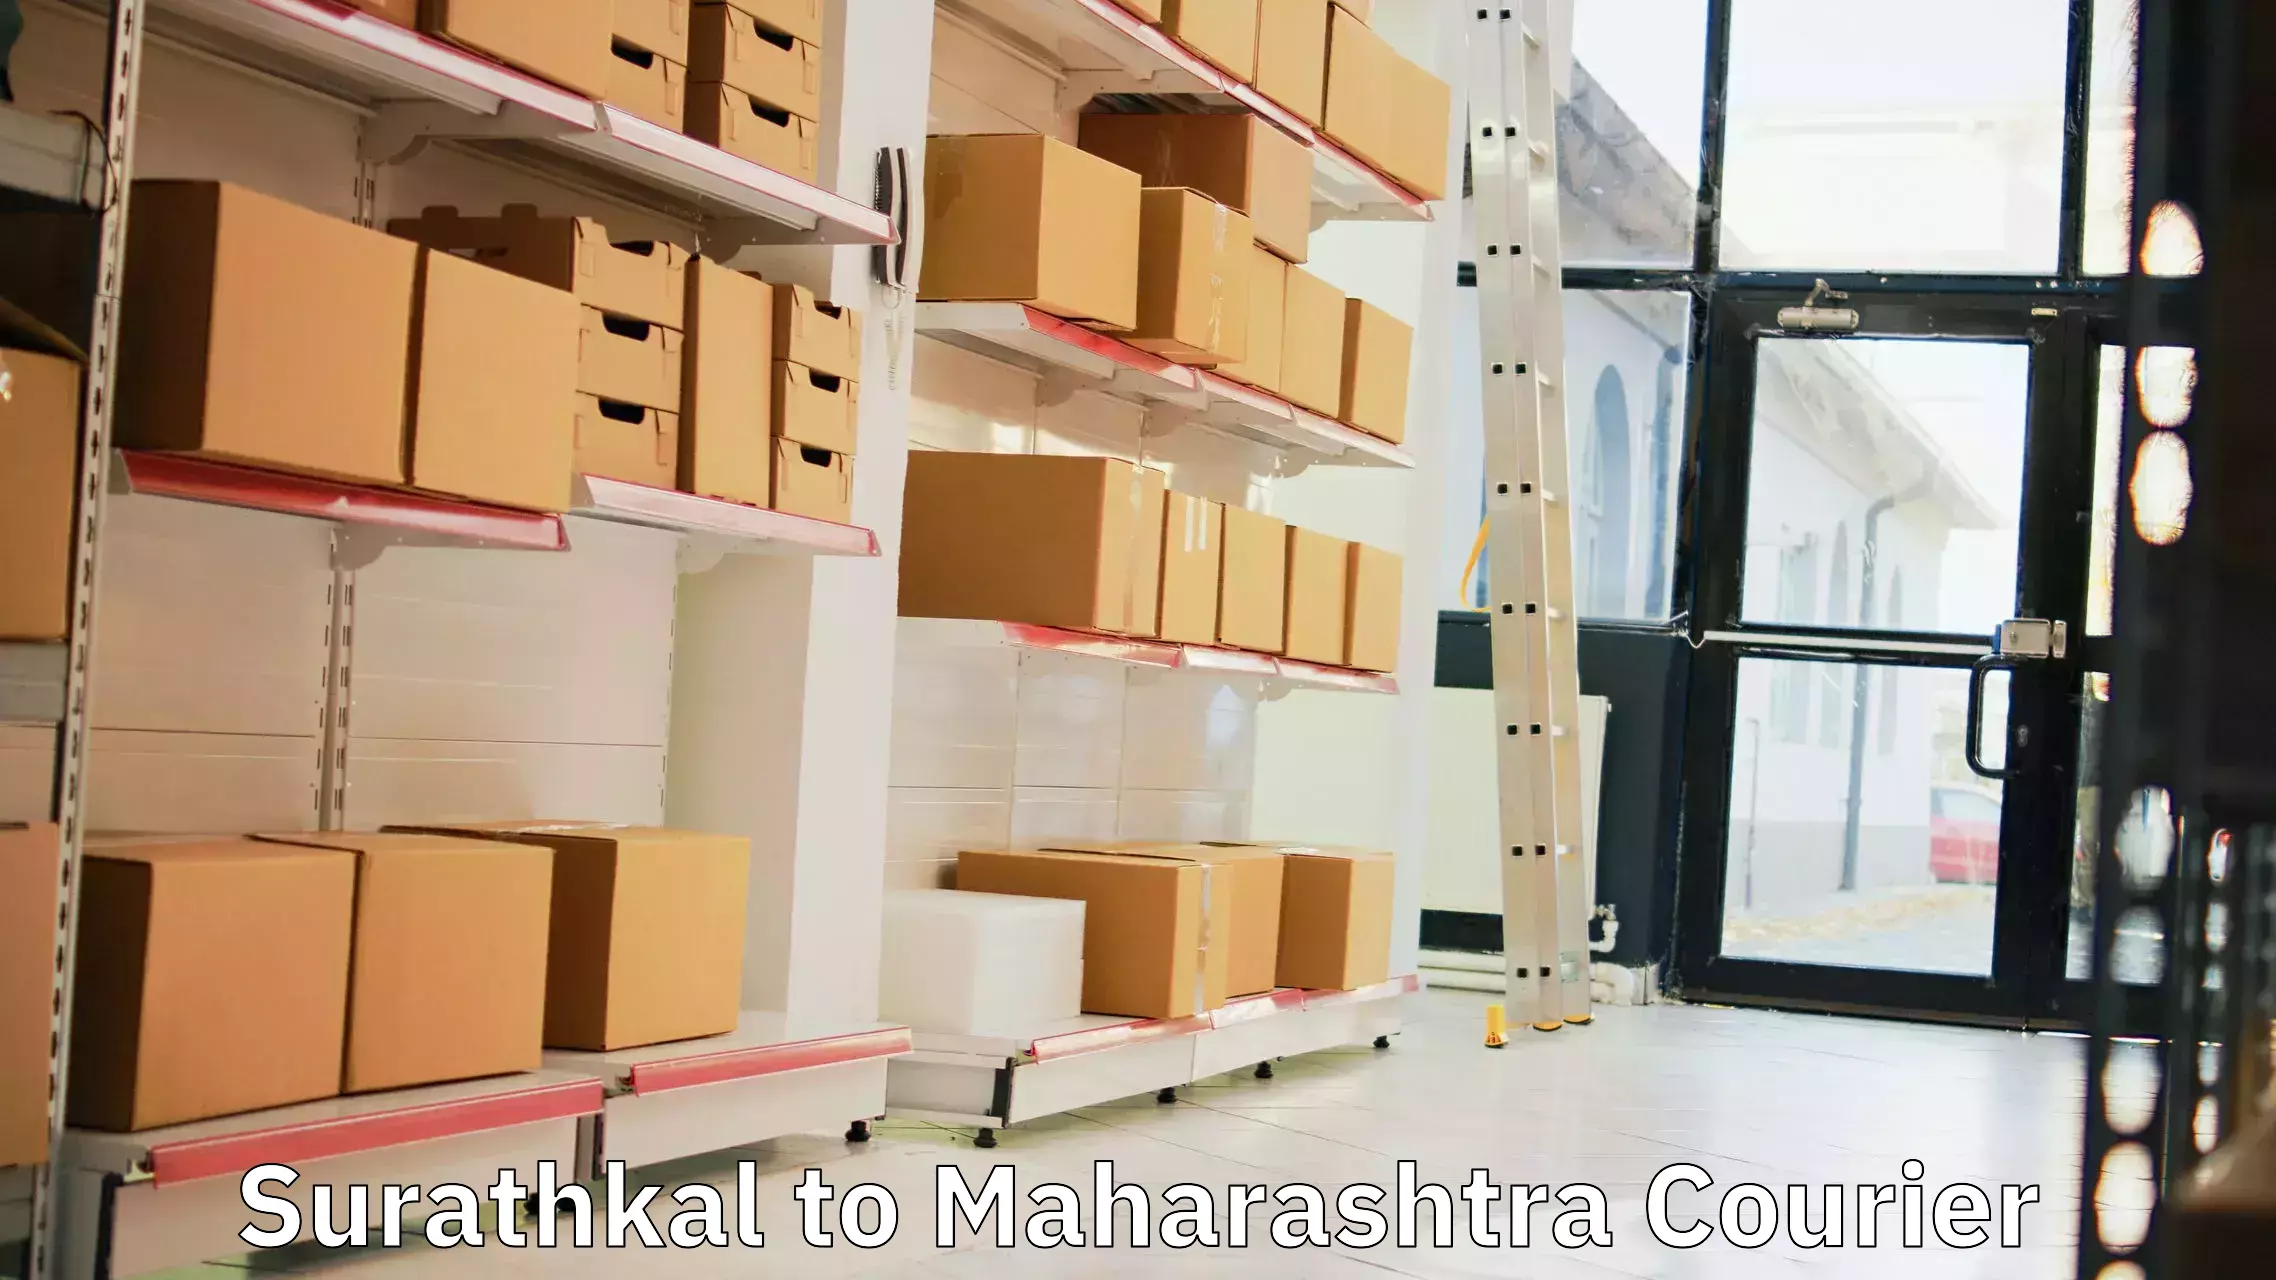 Courier service booking Surathkal to Rajura